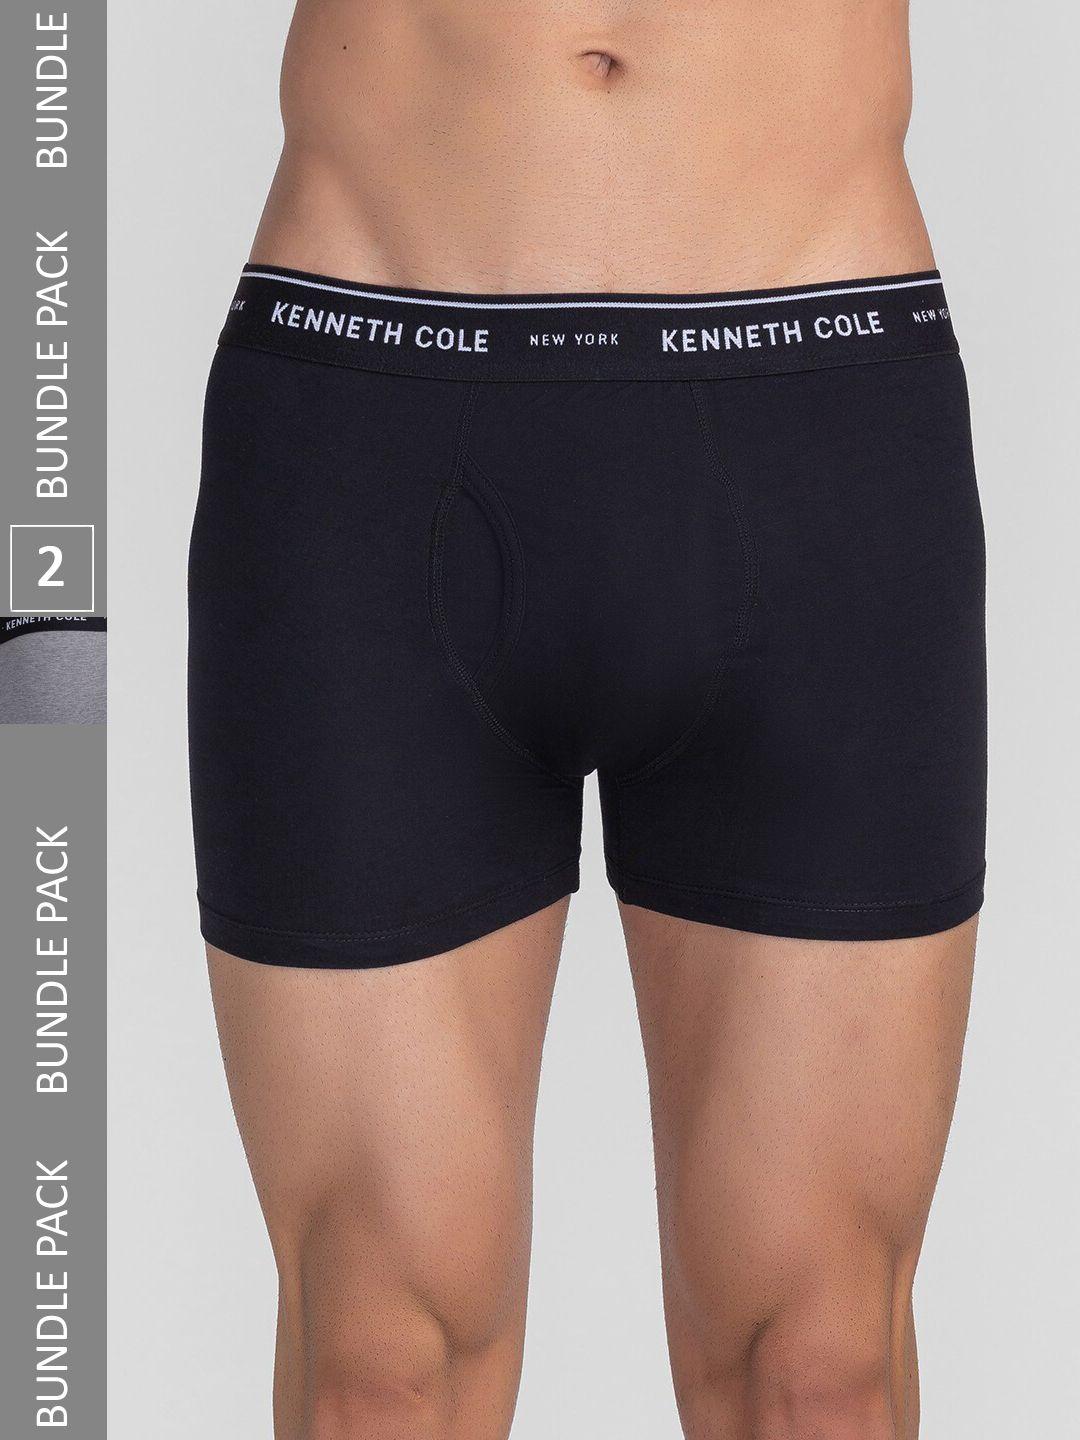 kenneth cole men pack of 2 brand logo printed waistband outer elastic trunks